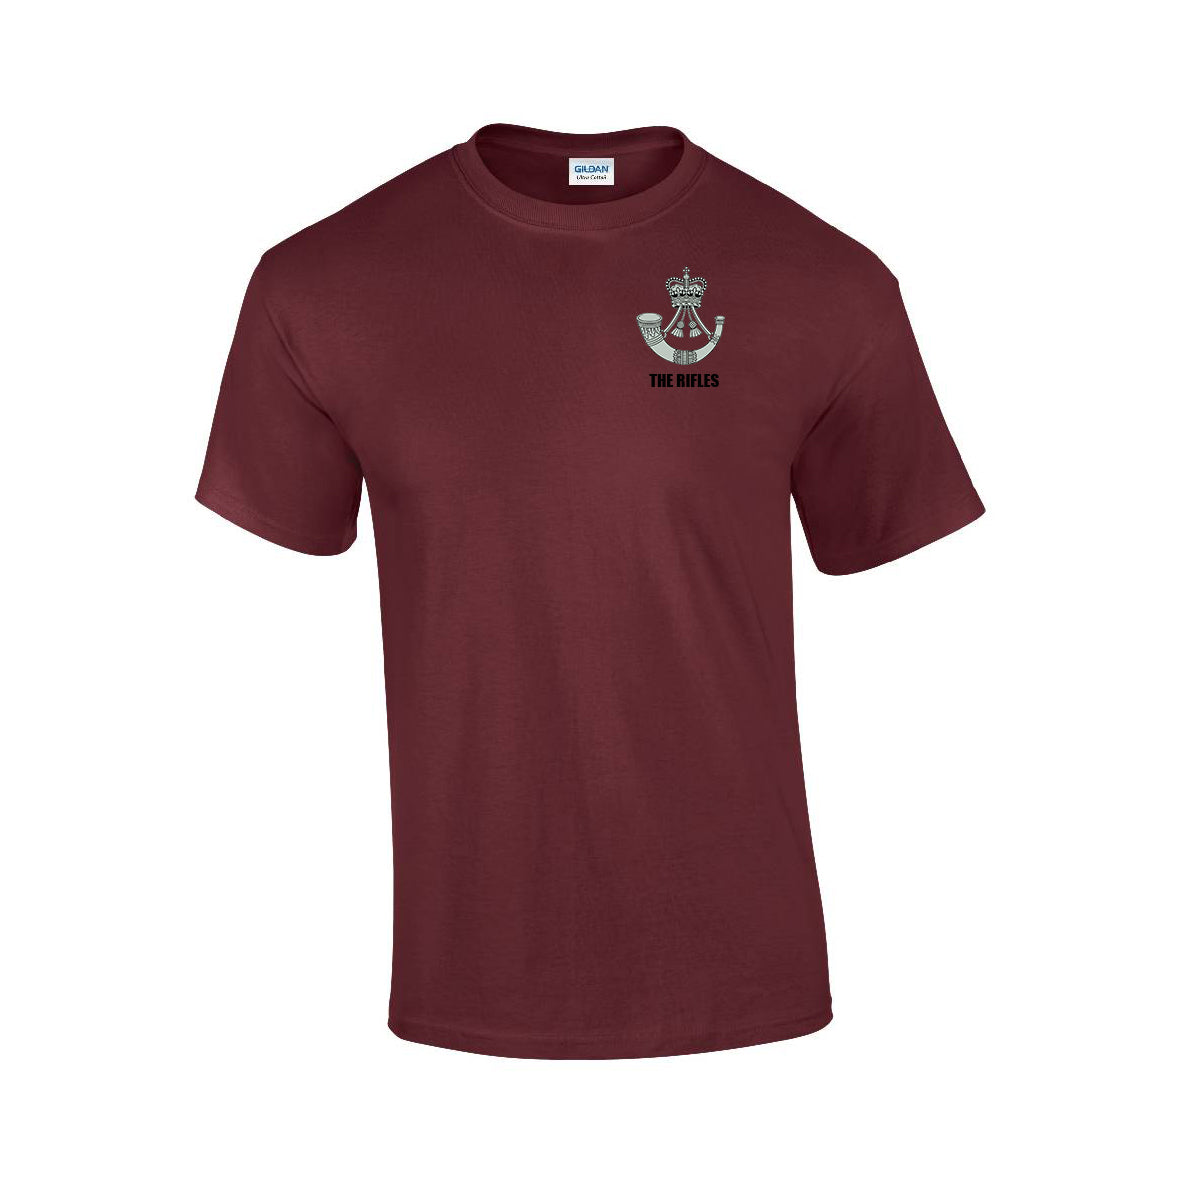 GD02 - The Rifles Premium Quality Embroidered T-Shirt - Bespoke Emerald Embroidery Ltd